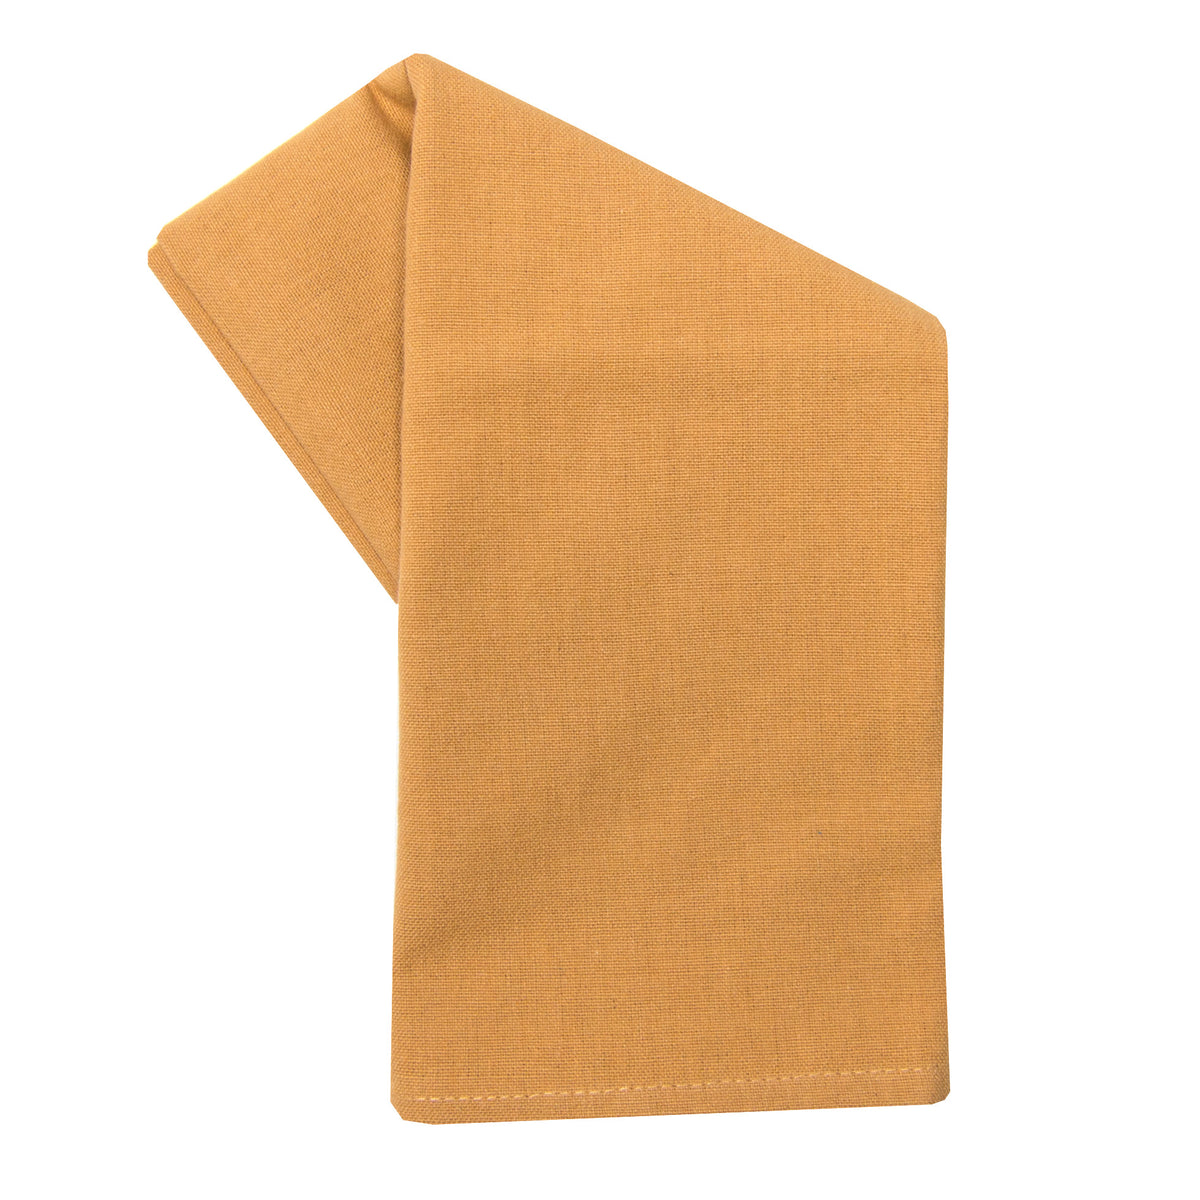 Clearance Priced - Decorative Solid Plain Weave Kitchen/Tea Towels